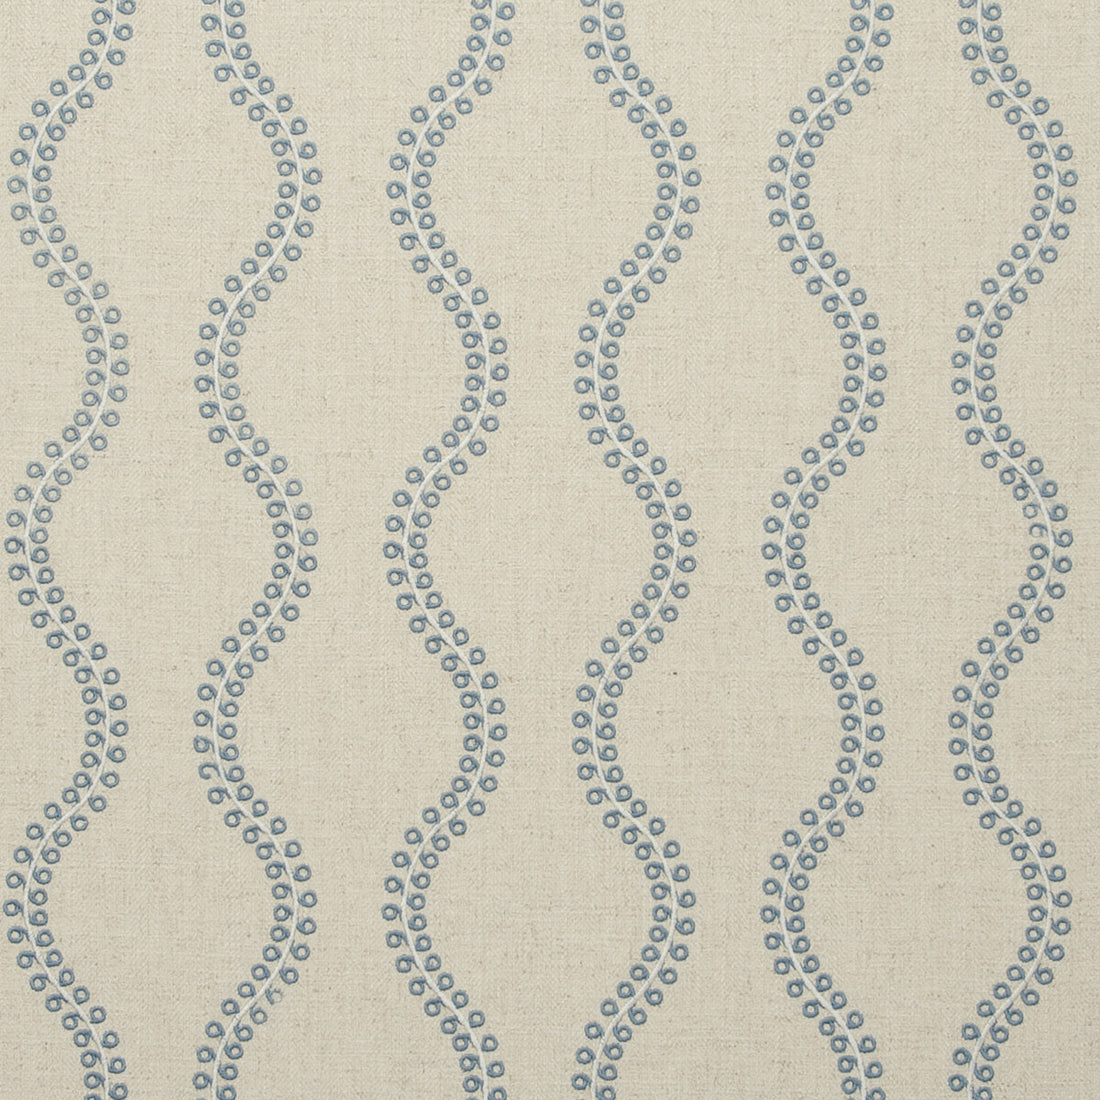 Woburn fabric in chambray color - pattern F0741/02.CAC.0 - by Clarke And Clarke in the Clarke &amp; Clarke Manor House collection